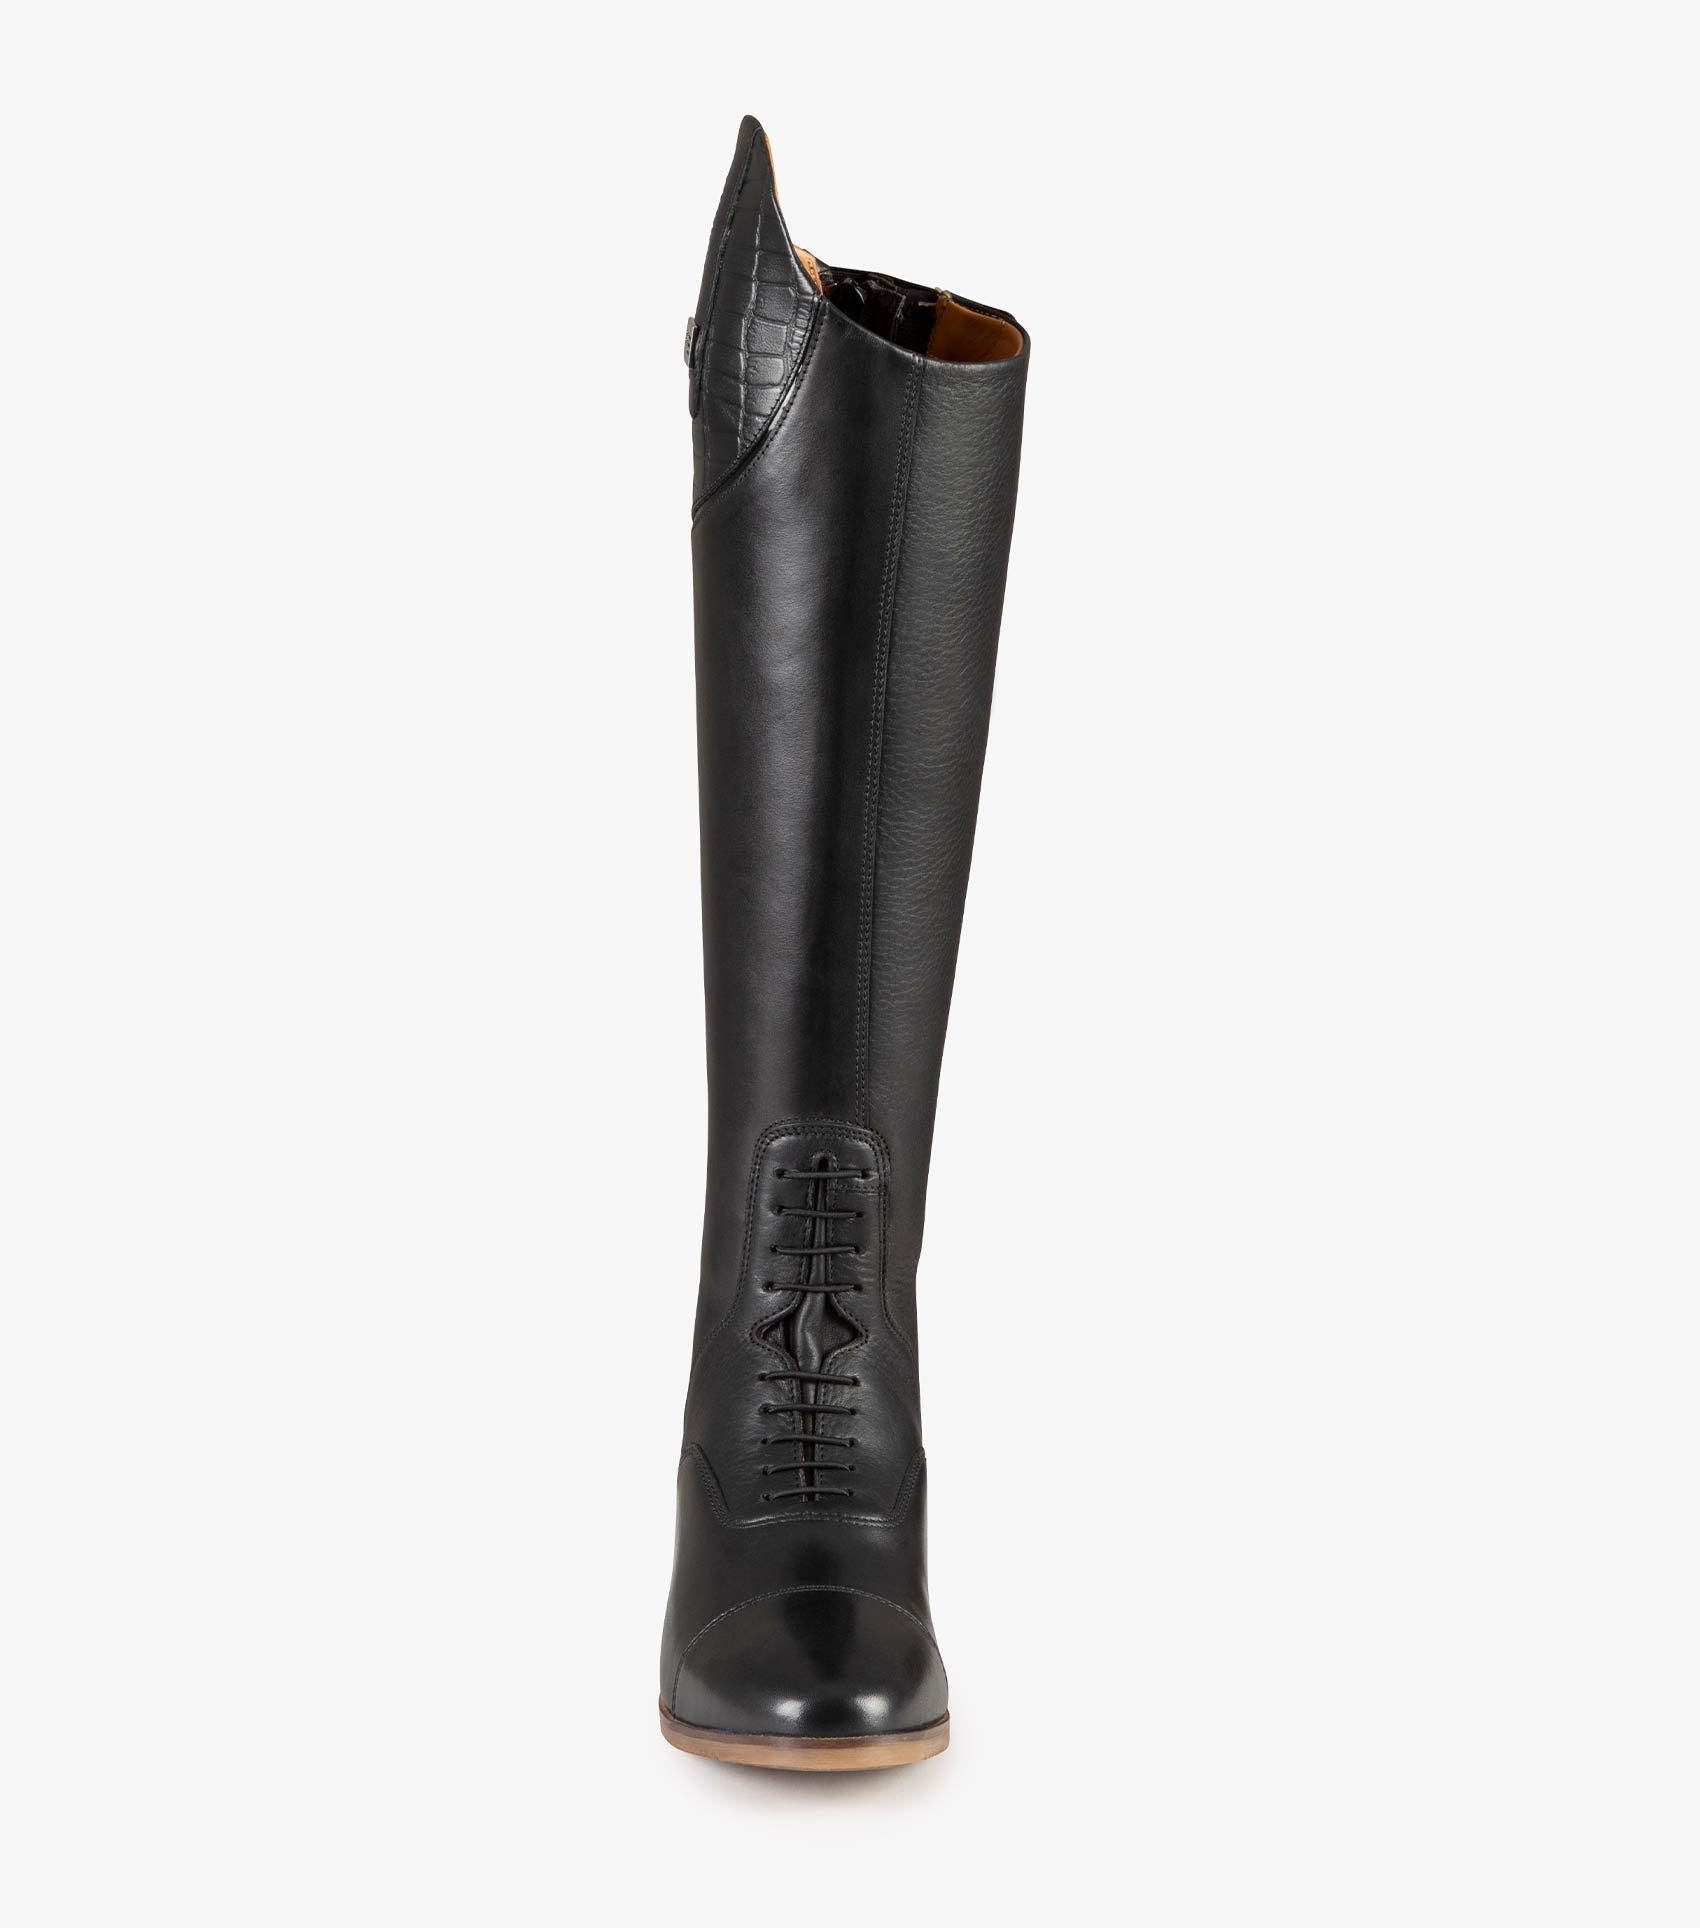 Premier Equine Passaggio Ladies Leather Field Tall Riding Boot - Black -  Robyn's Tack Room – ROBYN'S TACK ROOM